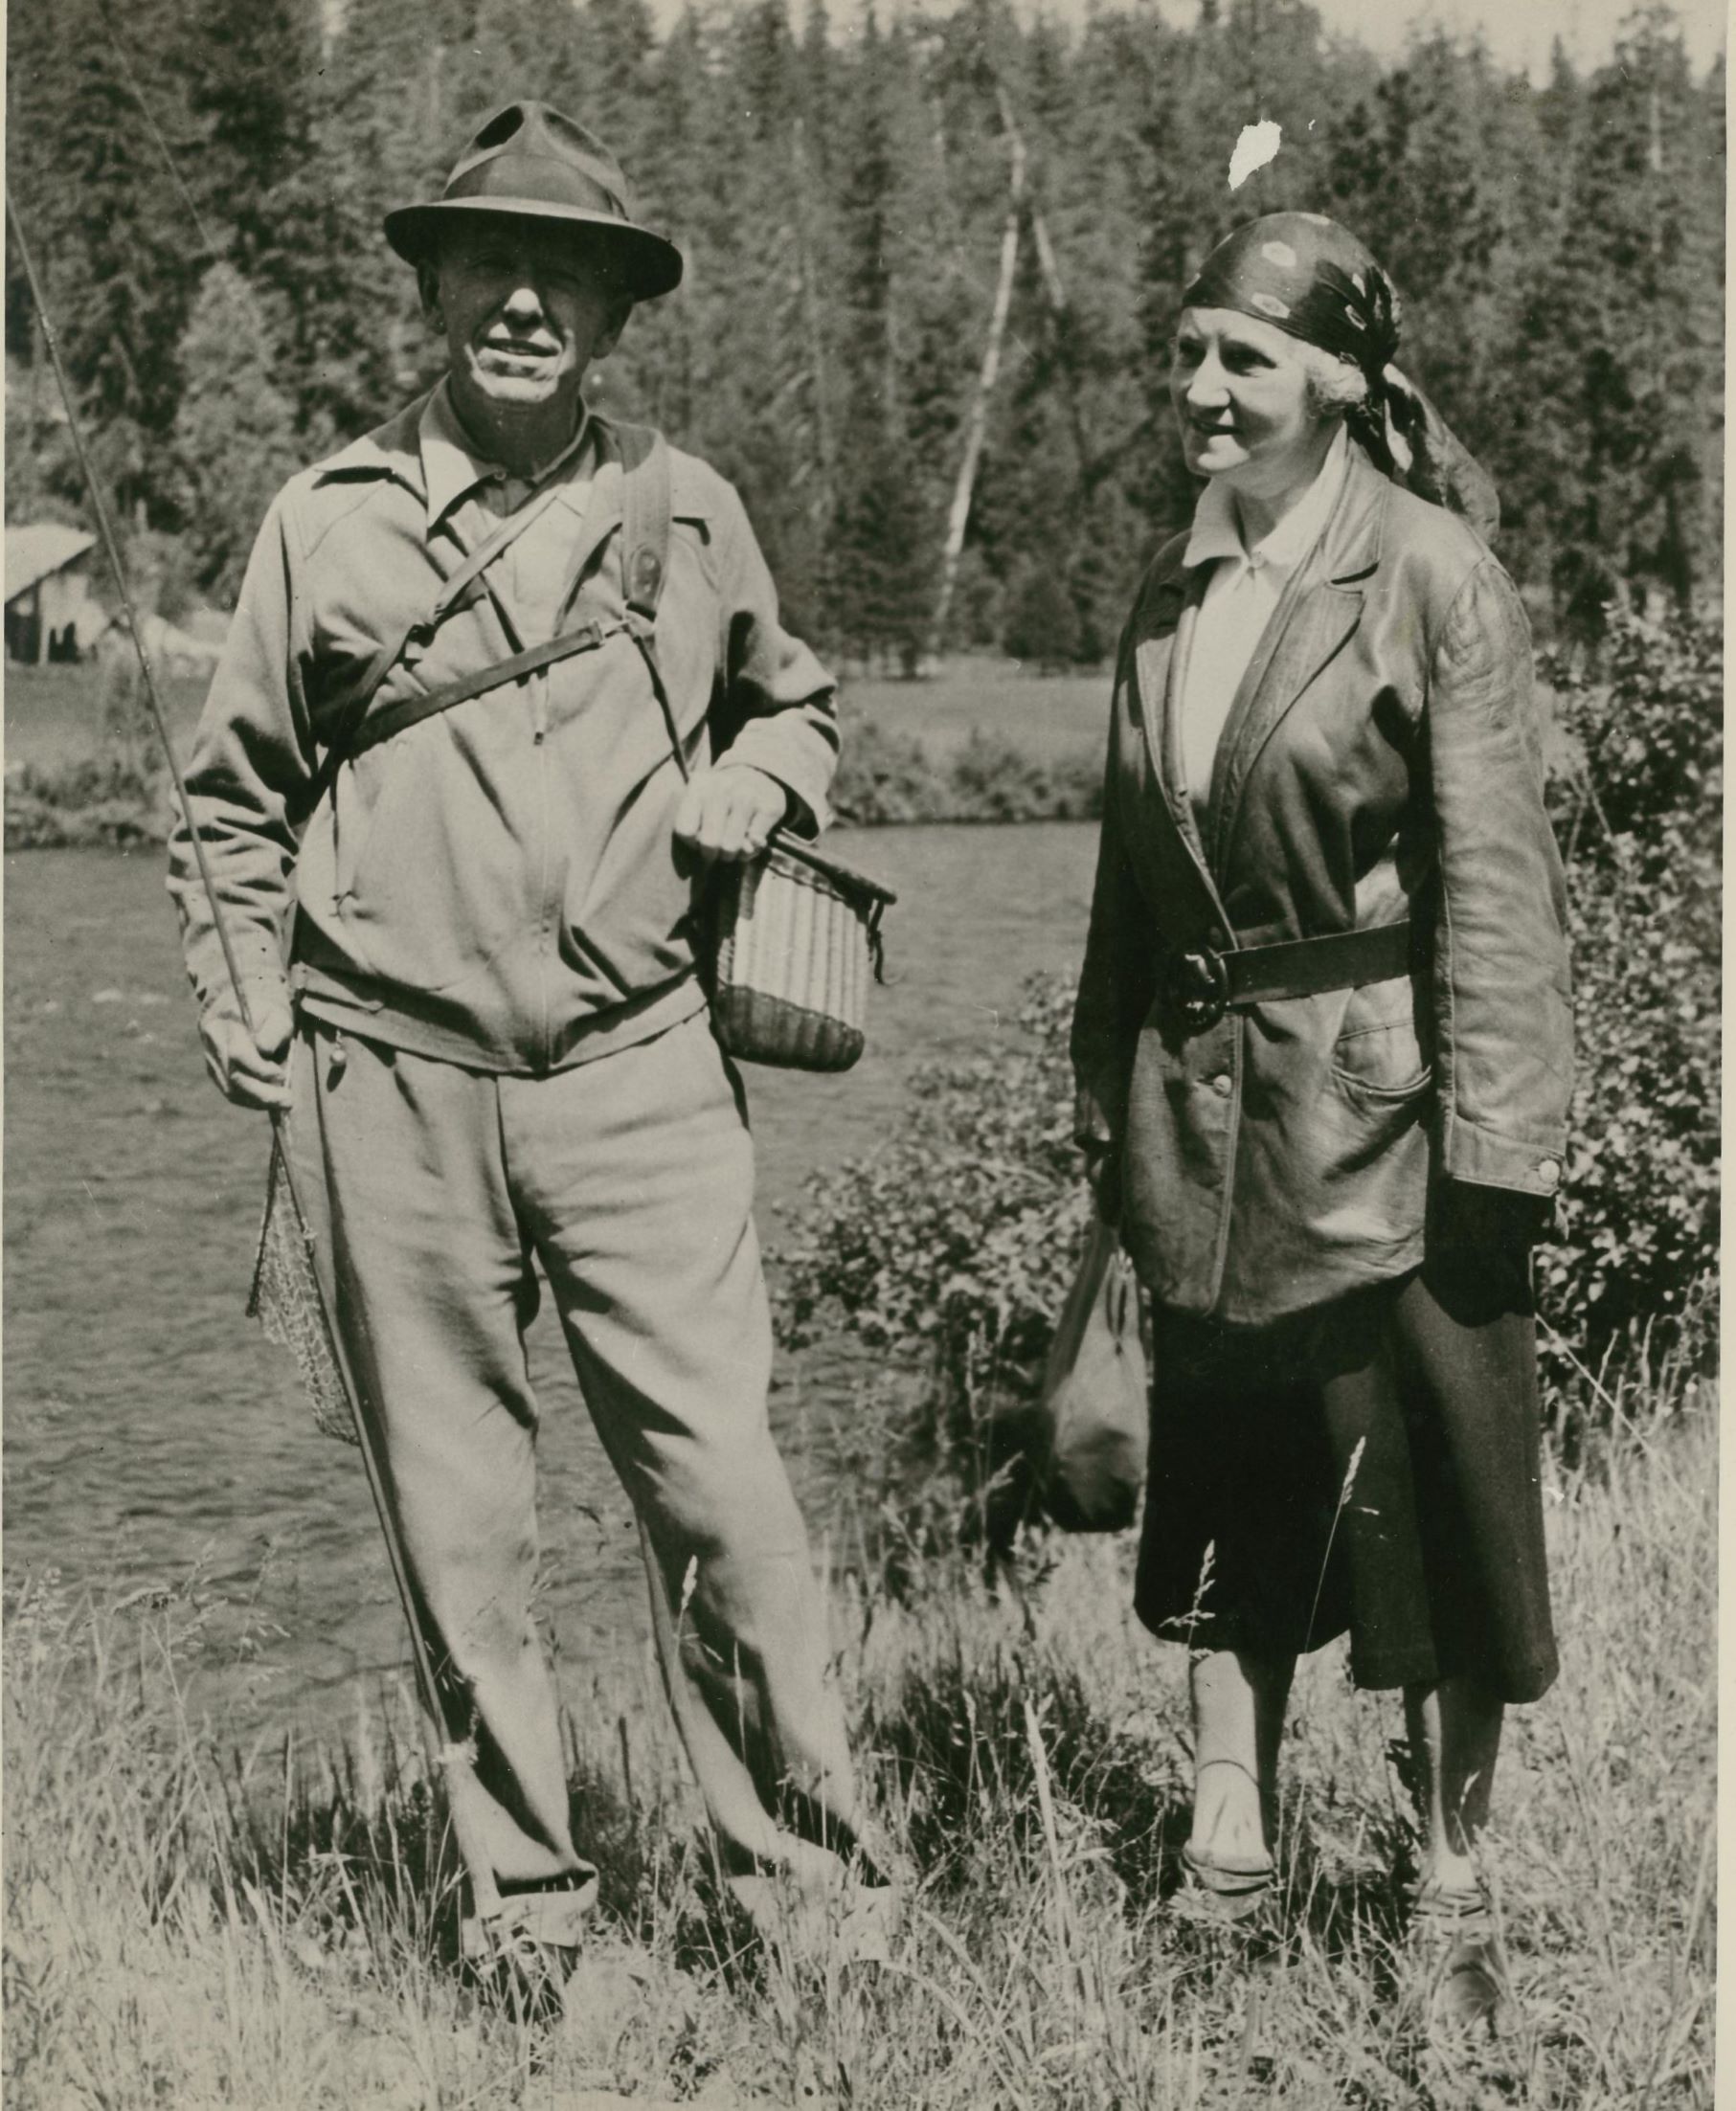 George and Katherine Marshall on a fishing trip in Vancouver, WA.